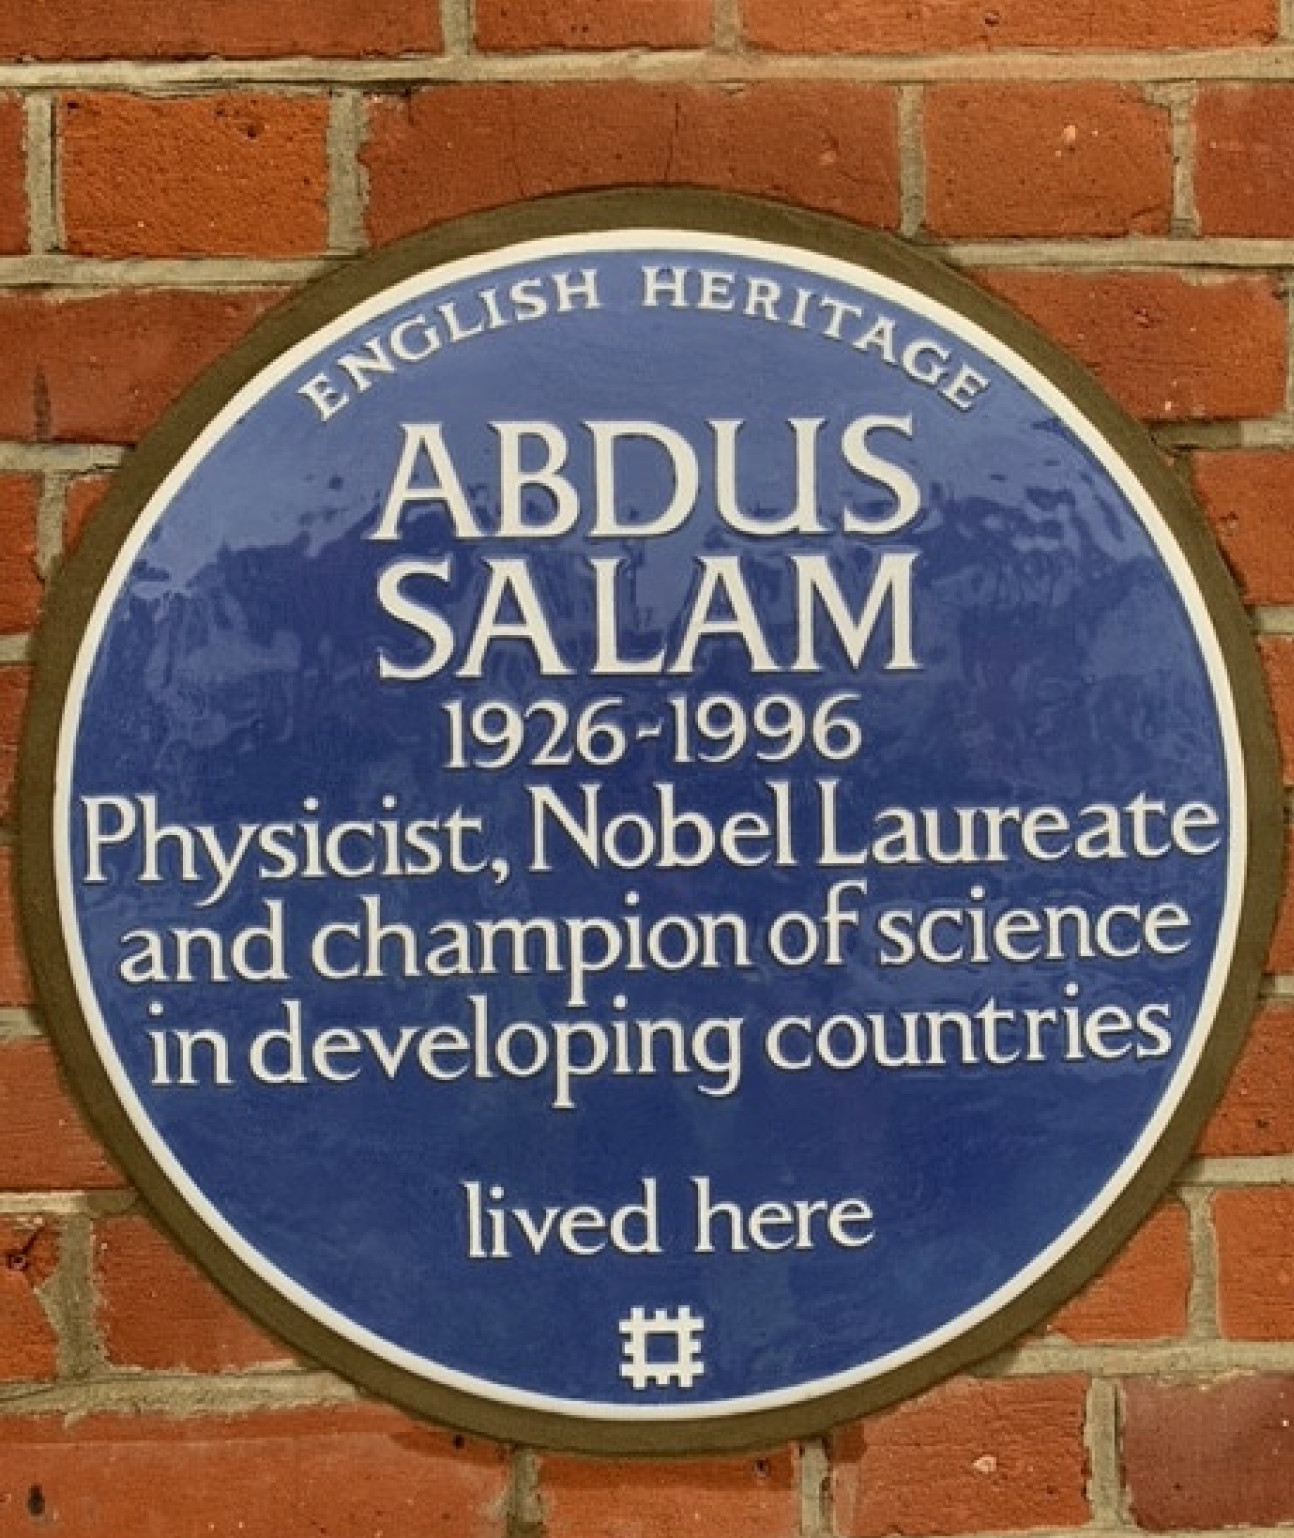 The plaque, which reads: Abdus Salam 1926-1996. Physicist, Nobel Laureate and champion of science in developing countries lived here